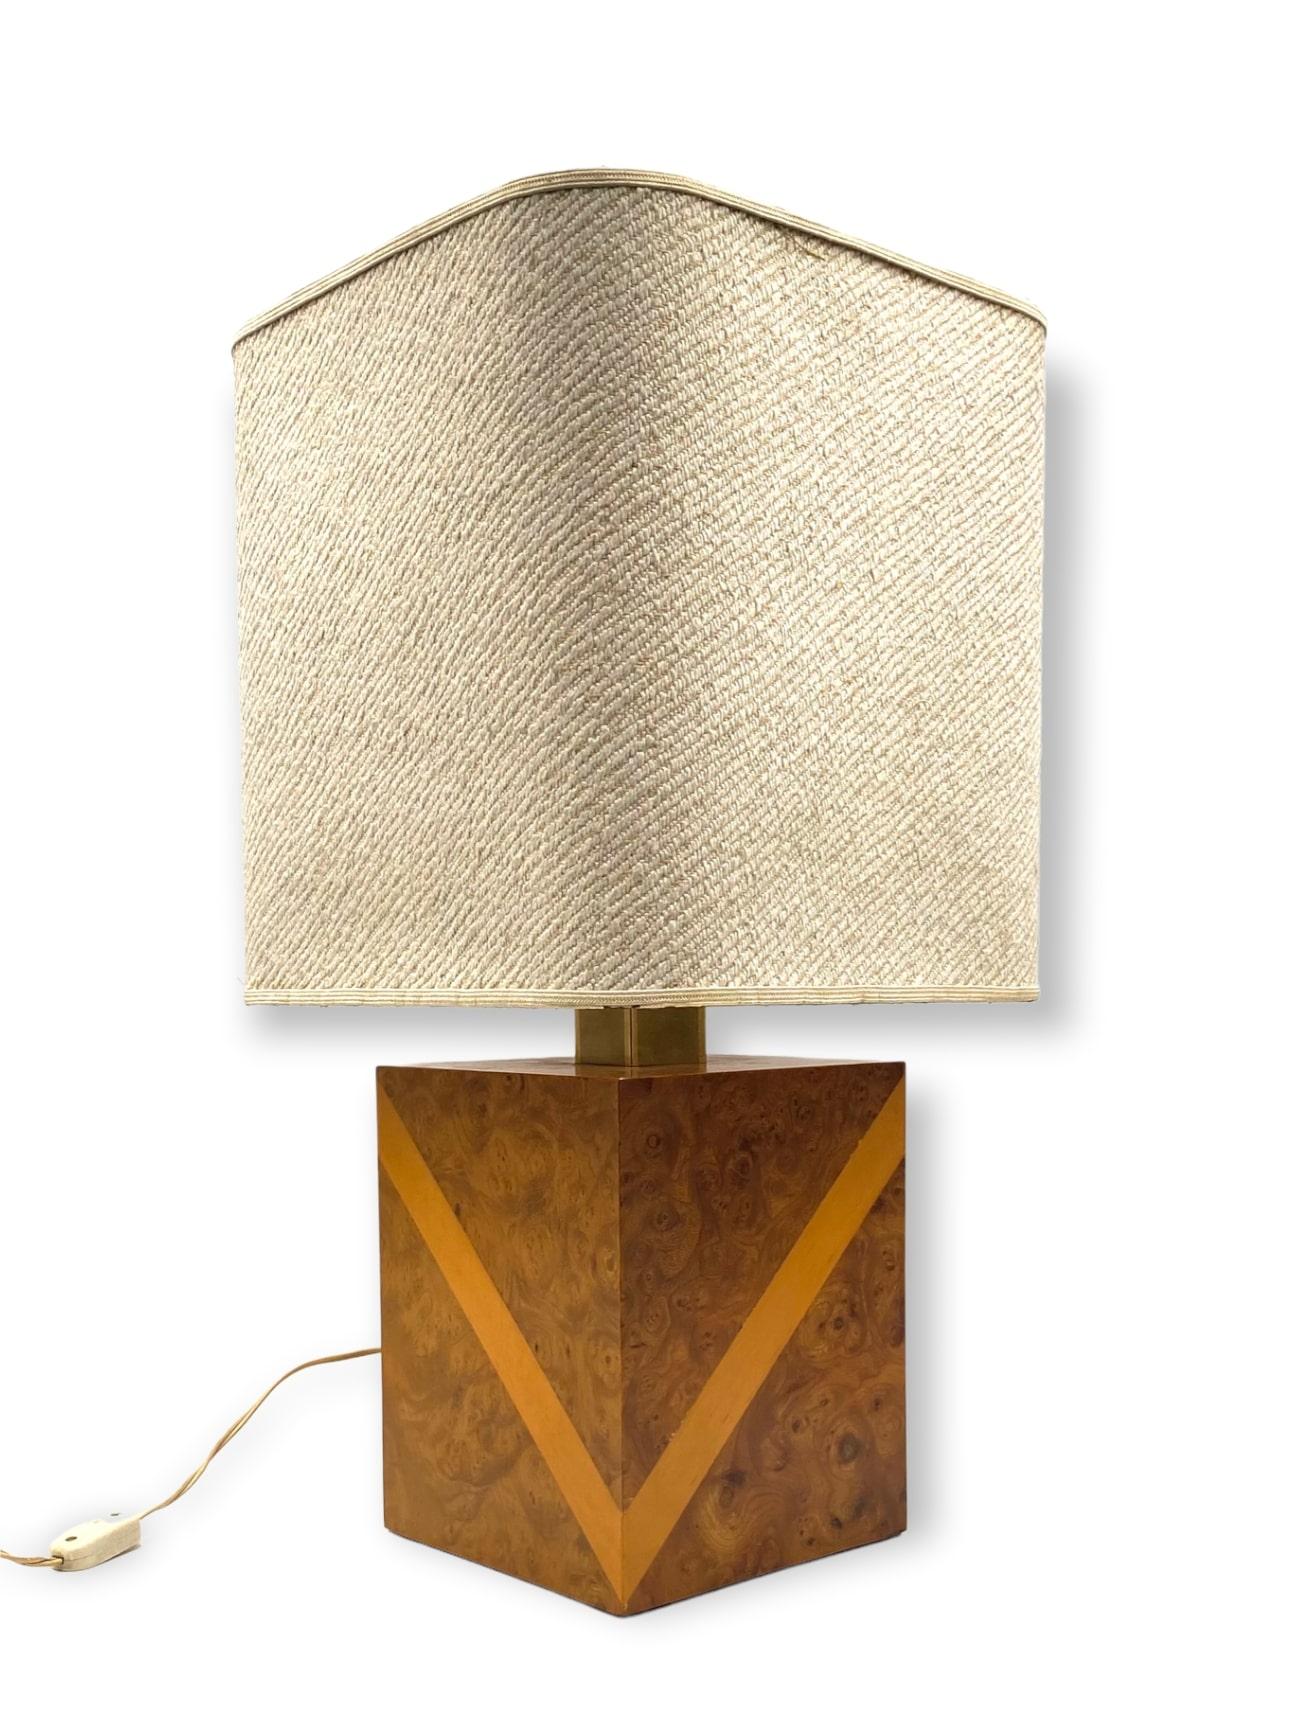 Hollywood Regency Cubic Wood and Brass Table Lamp, Italy, 1970s For Sale 11